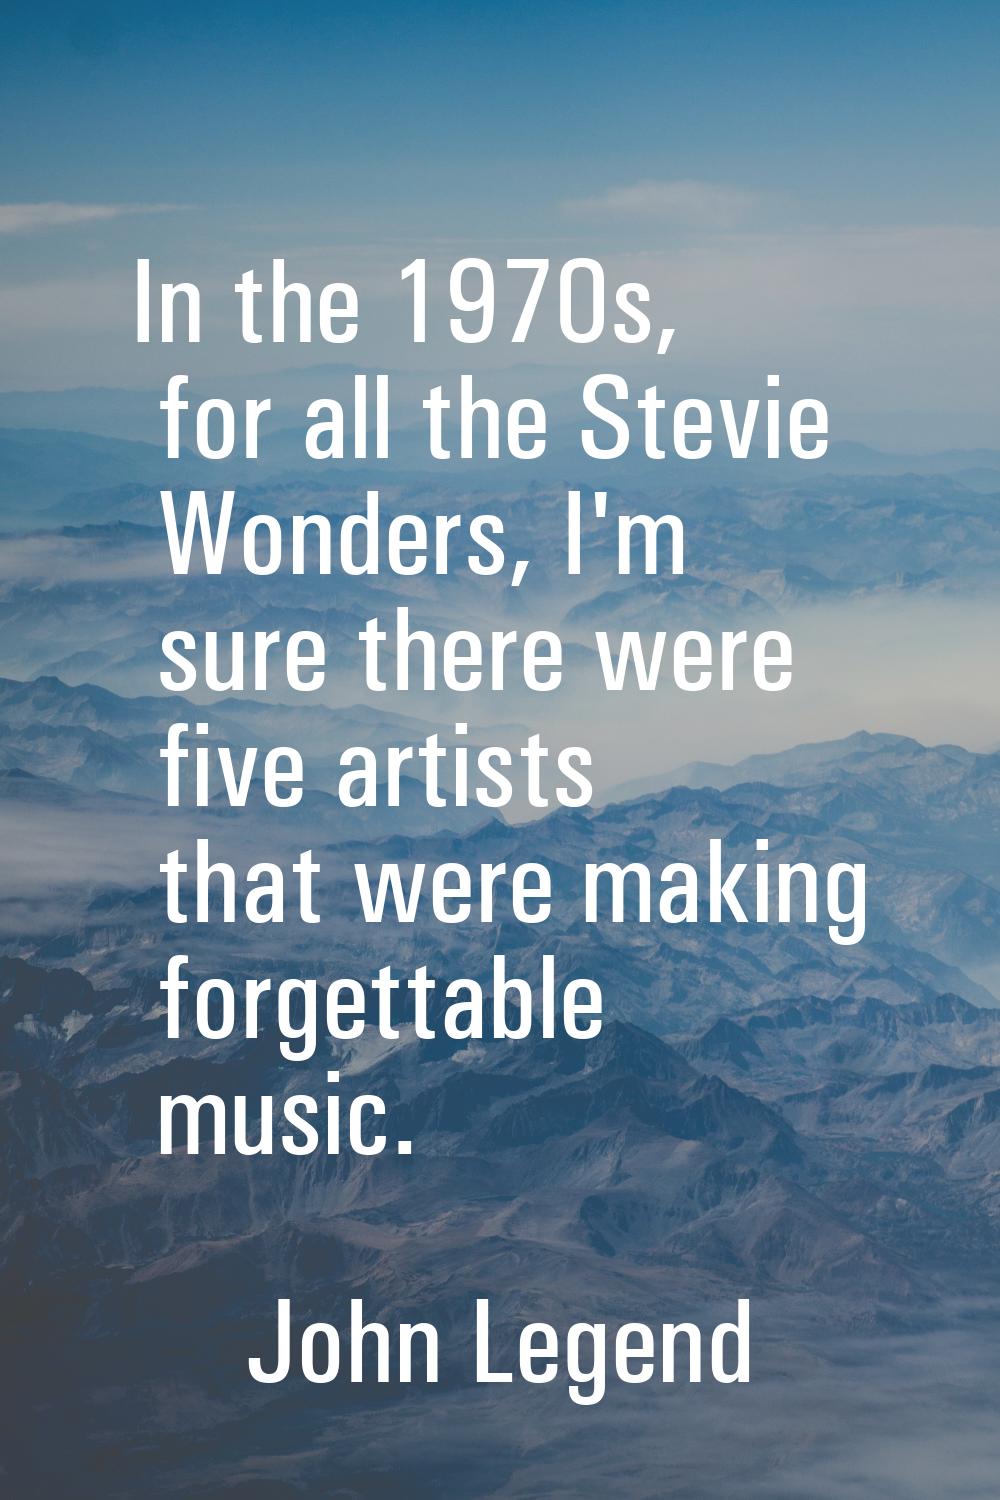 In the 1970s, for all the Stevie Wonders, I'm sure there were five artists that were making forgett